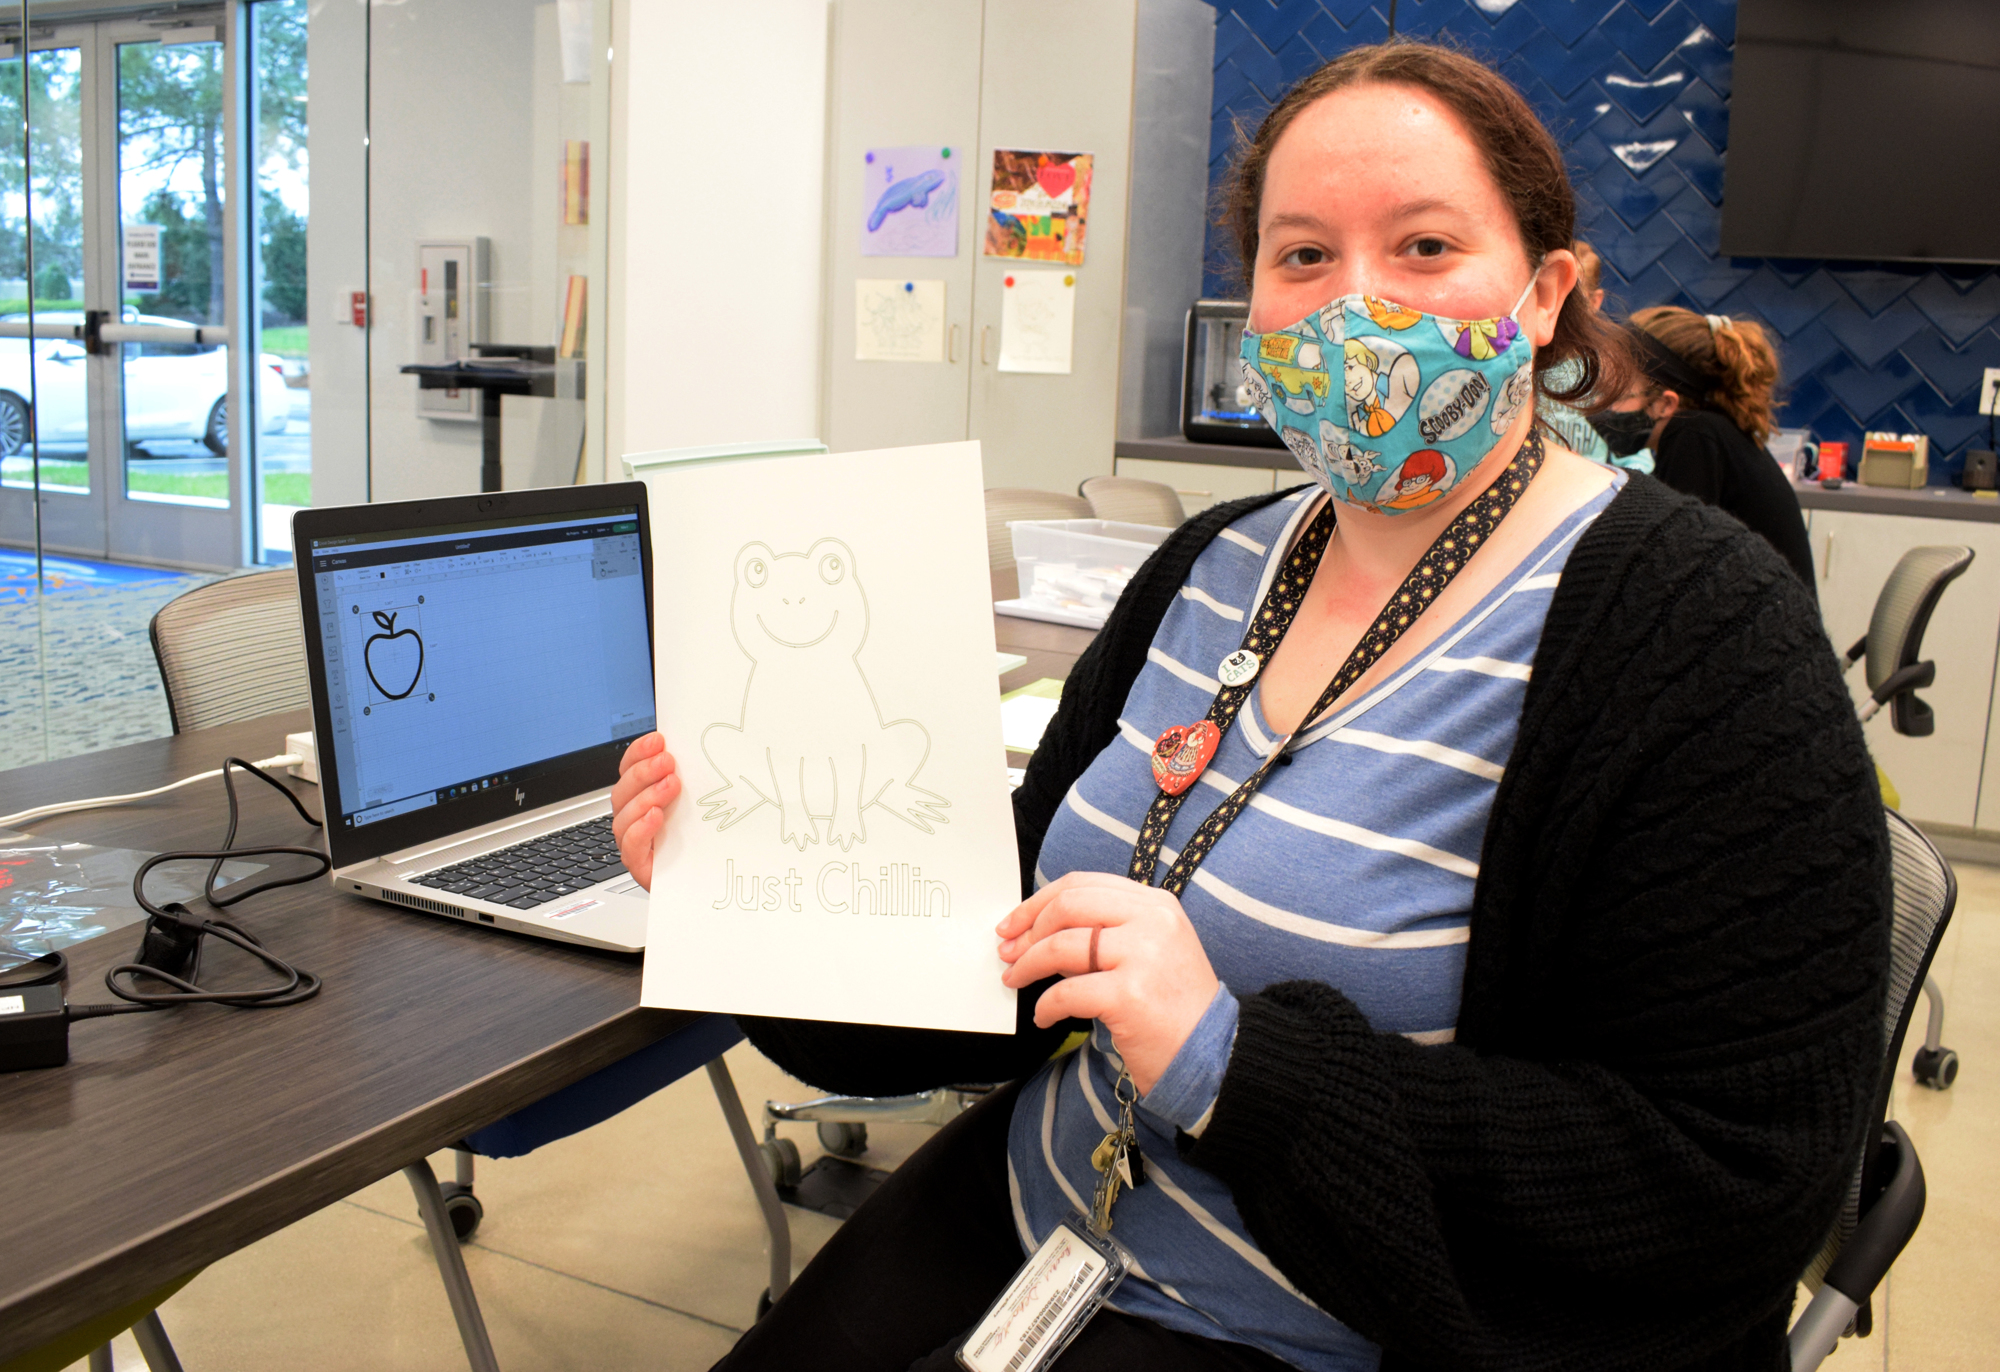 Rachel Scharbo, a library assistant, shows off one of the projects she made in Studio 70.